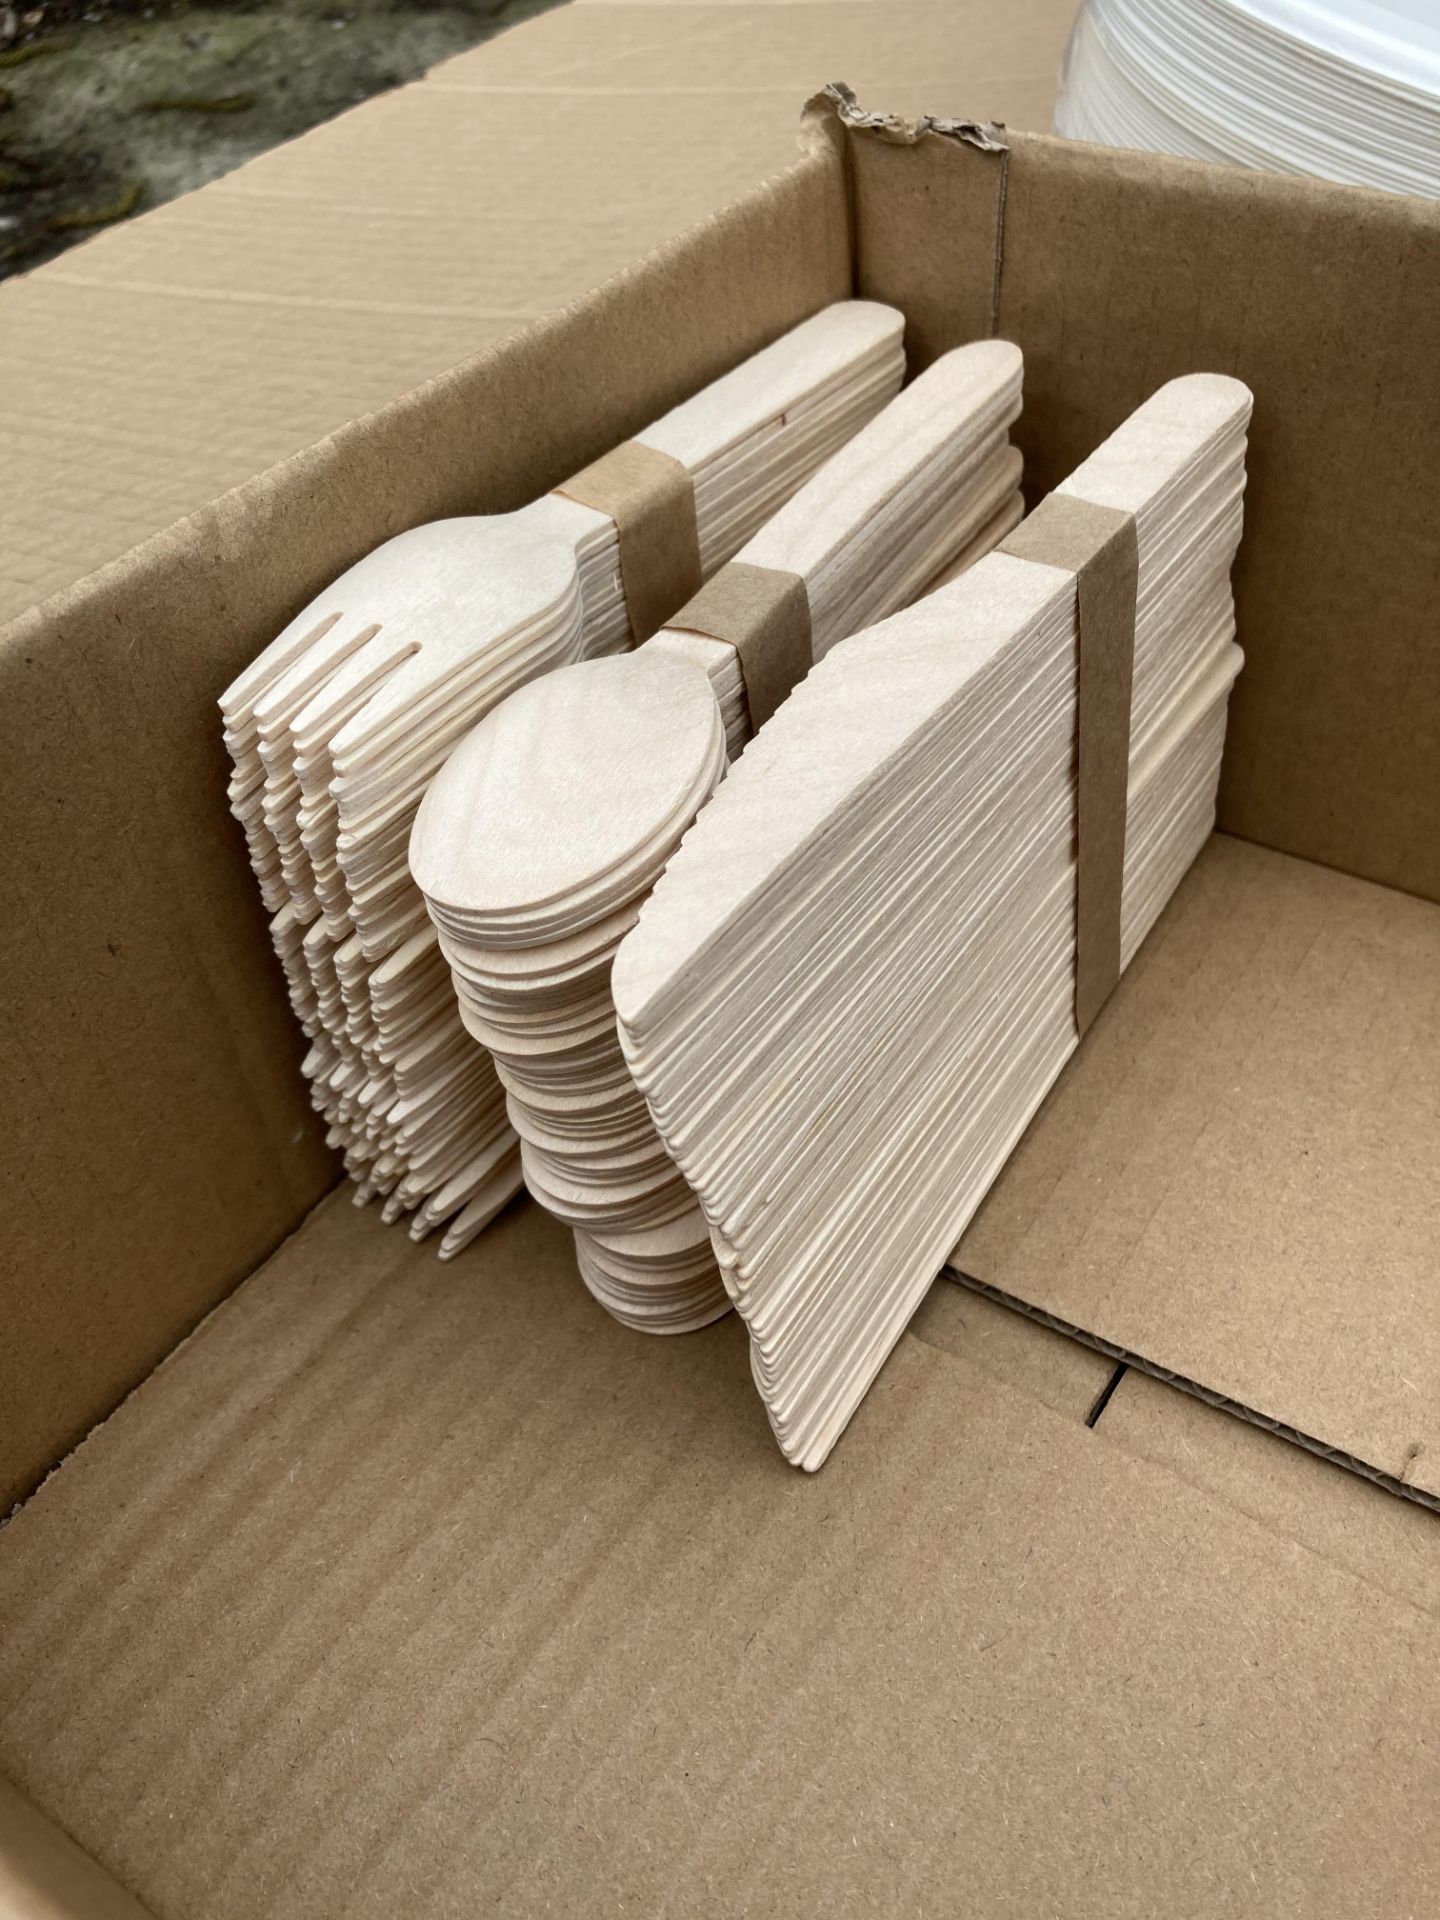 60 x Boxes of approximately 100 x Wooden Cutlery and Paper Plates (4 x outer boxes) (saleroom - Image 2 of 3